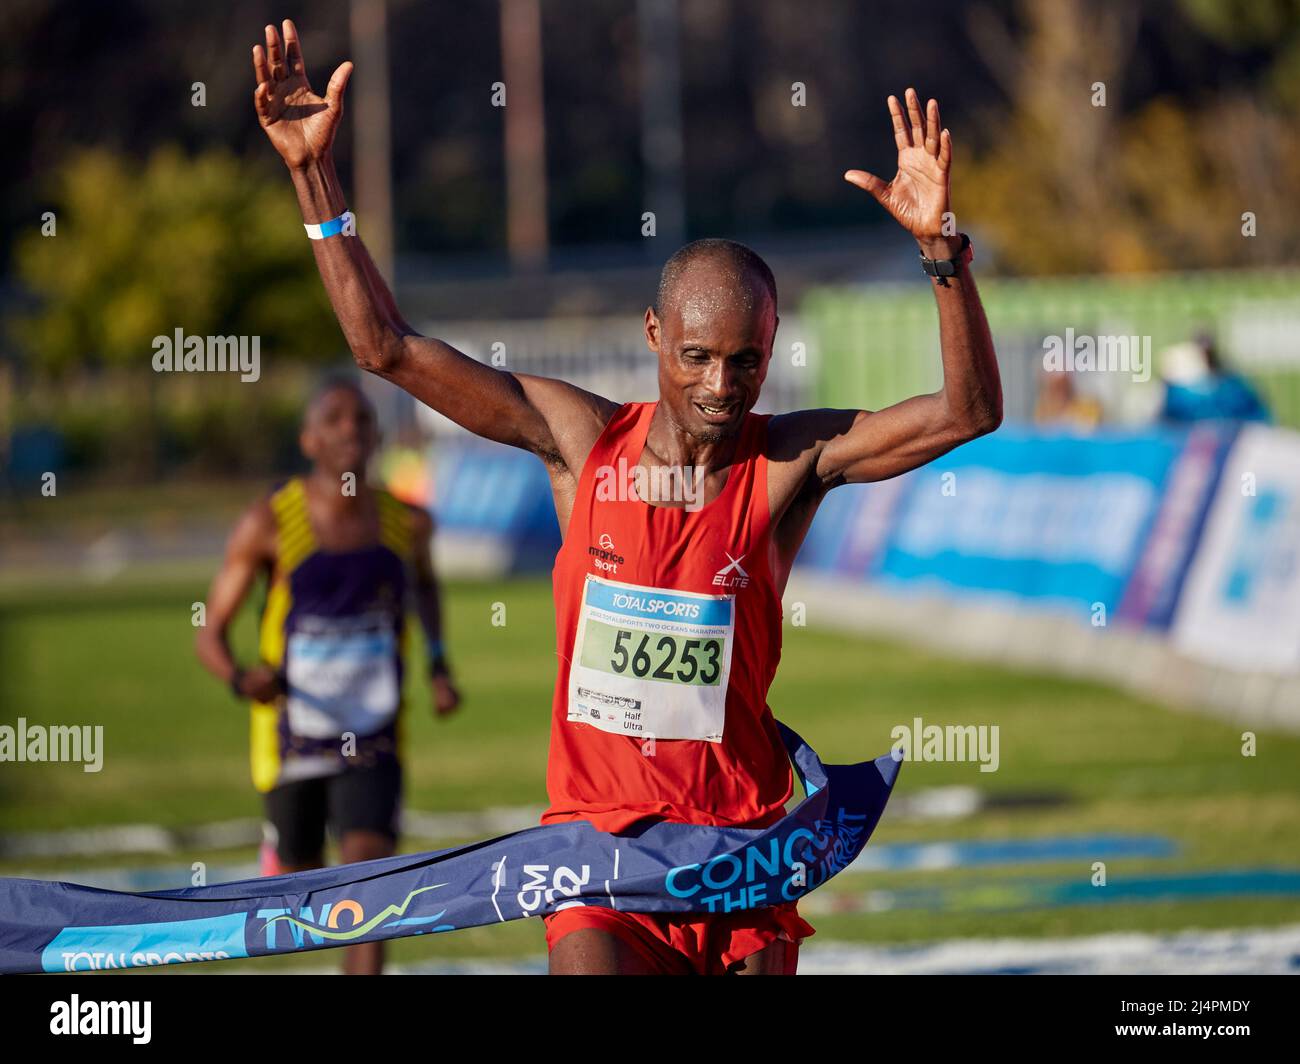 Cape Town, South Africa, 16th Apr 2022. Edndale Belachew, Mens Winner crosses the ahead of Nkosikhona Mhlakwana, in a sprint finish to the end. MO Bassa/Alamay Live News Stock Photo